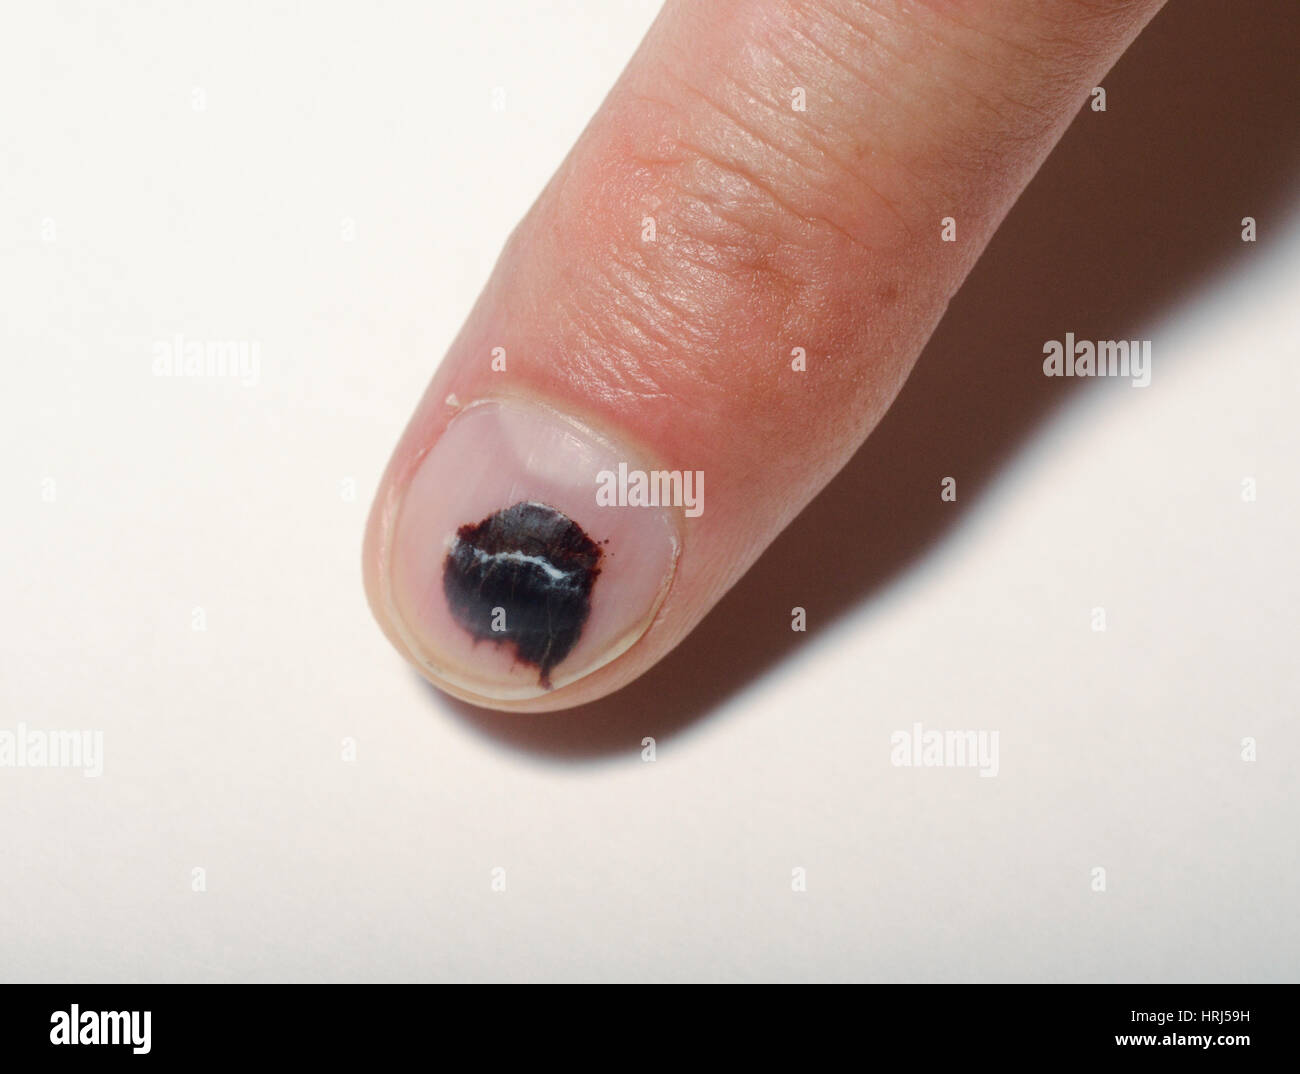 Blackened Nail Of Hand On Black Background Stock Photo - Download Image Now  - Adult, Adults Only, Black Color - iStock